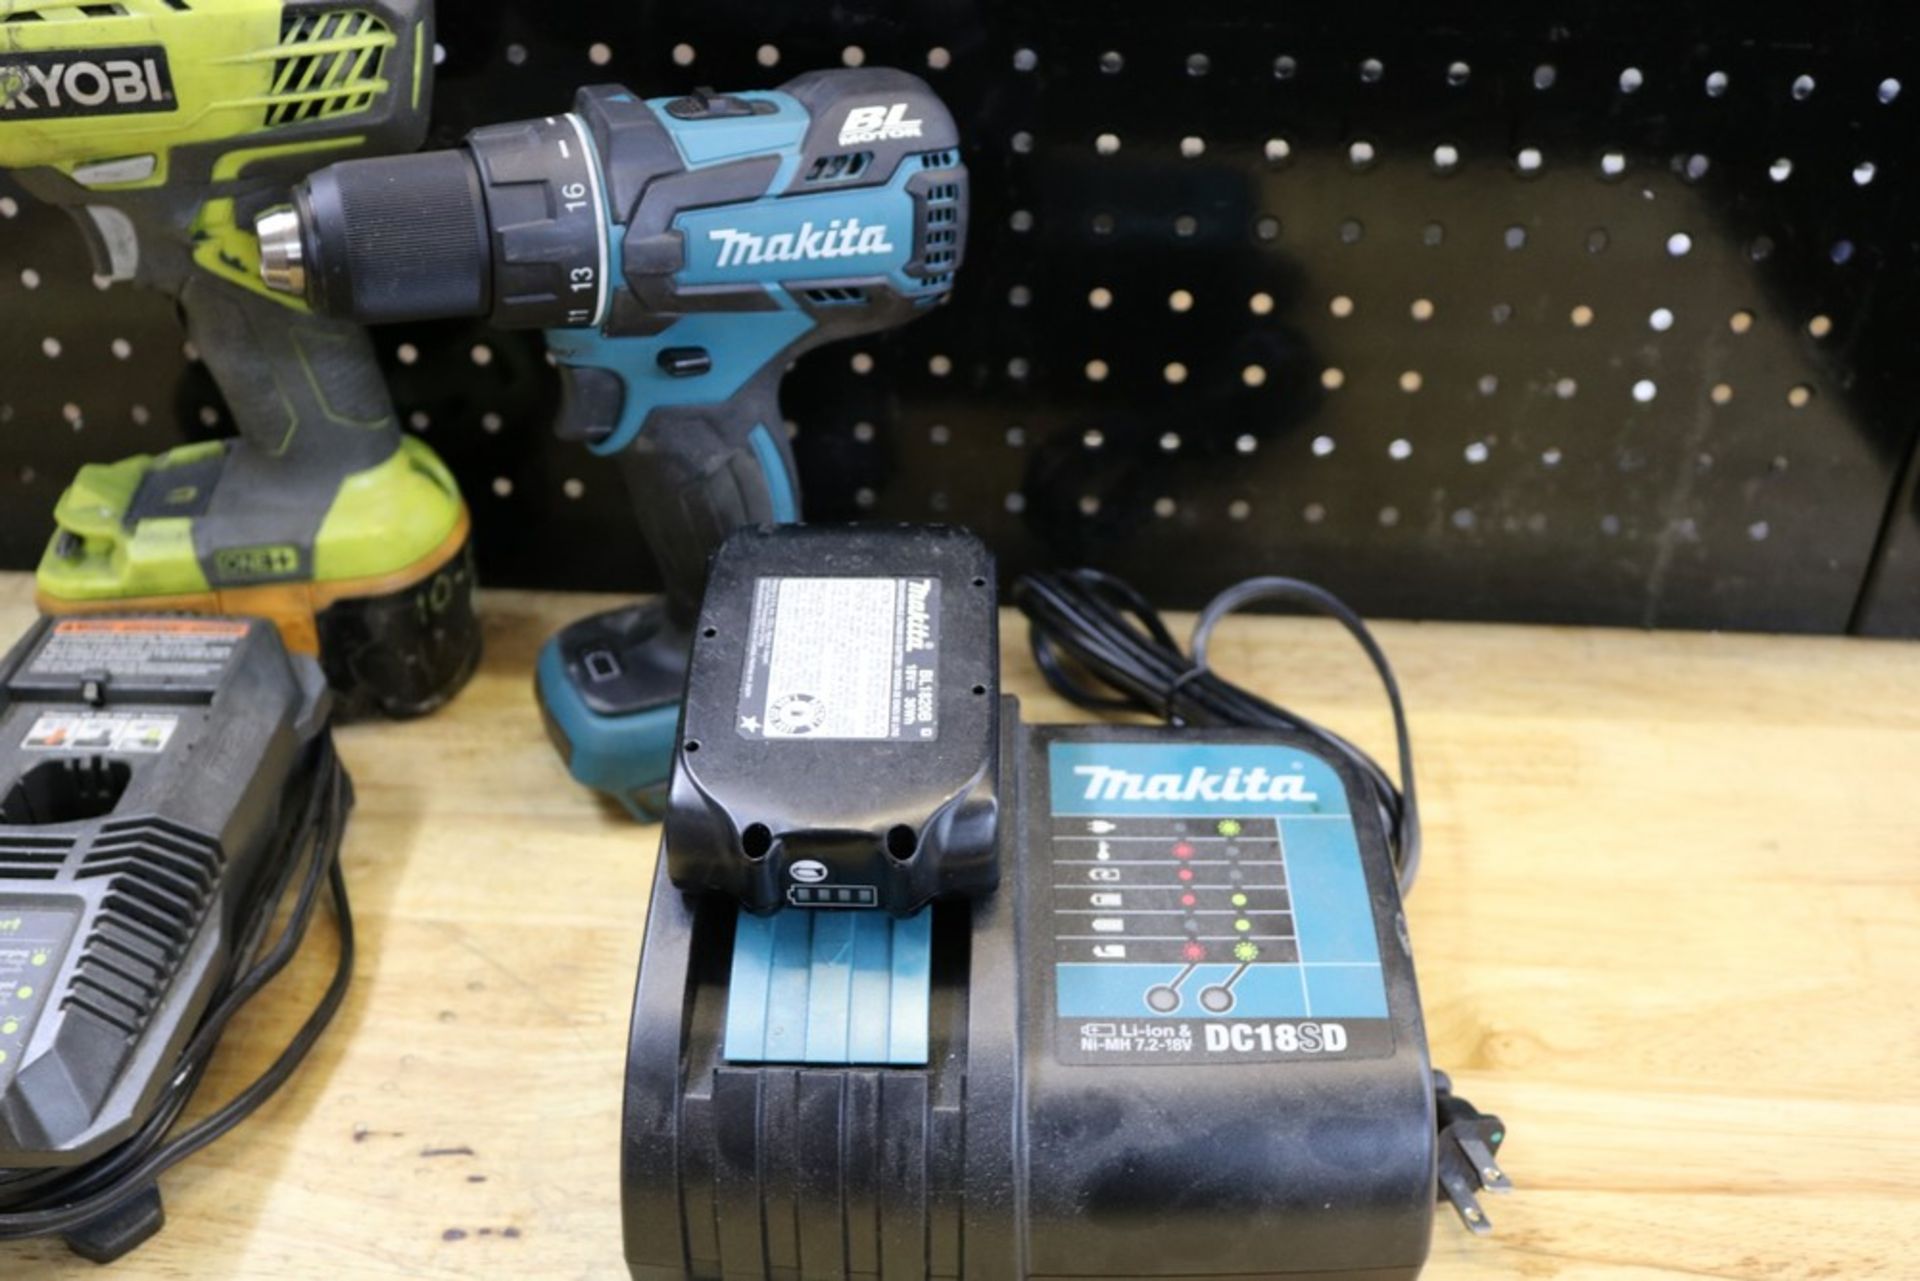 Makita XFD06 Cordelss Drill 18V with Battery and Charger, Ryobi 18v Cordless Drill with Battery - Image 2 of 3